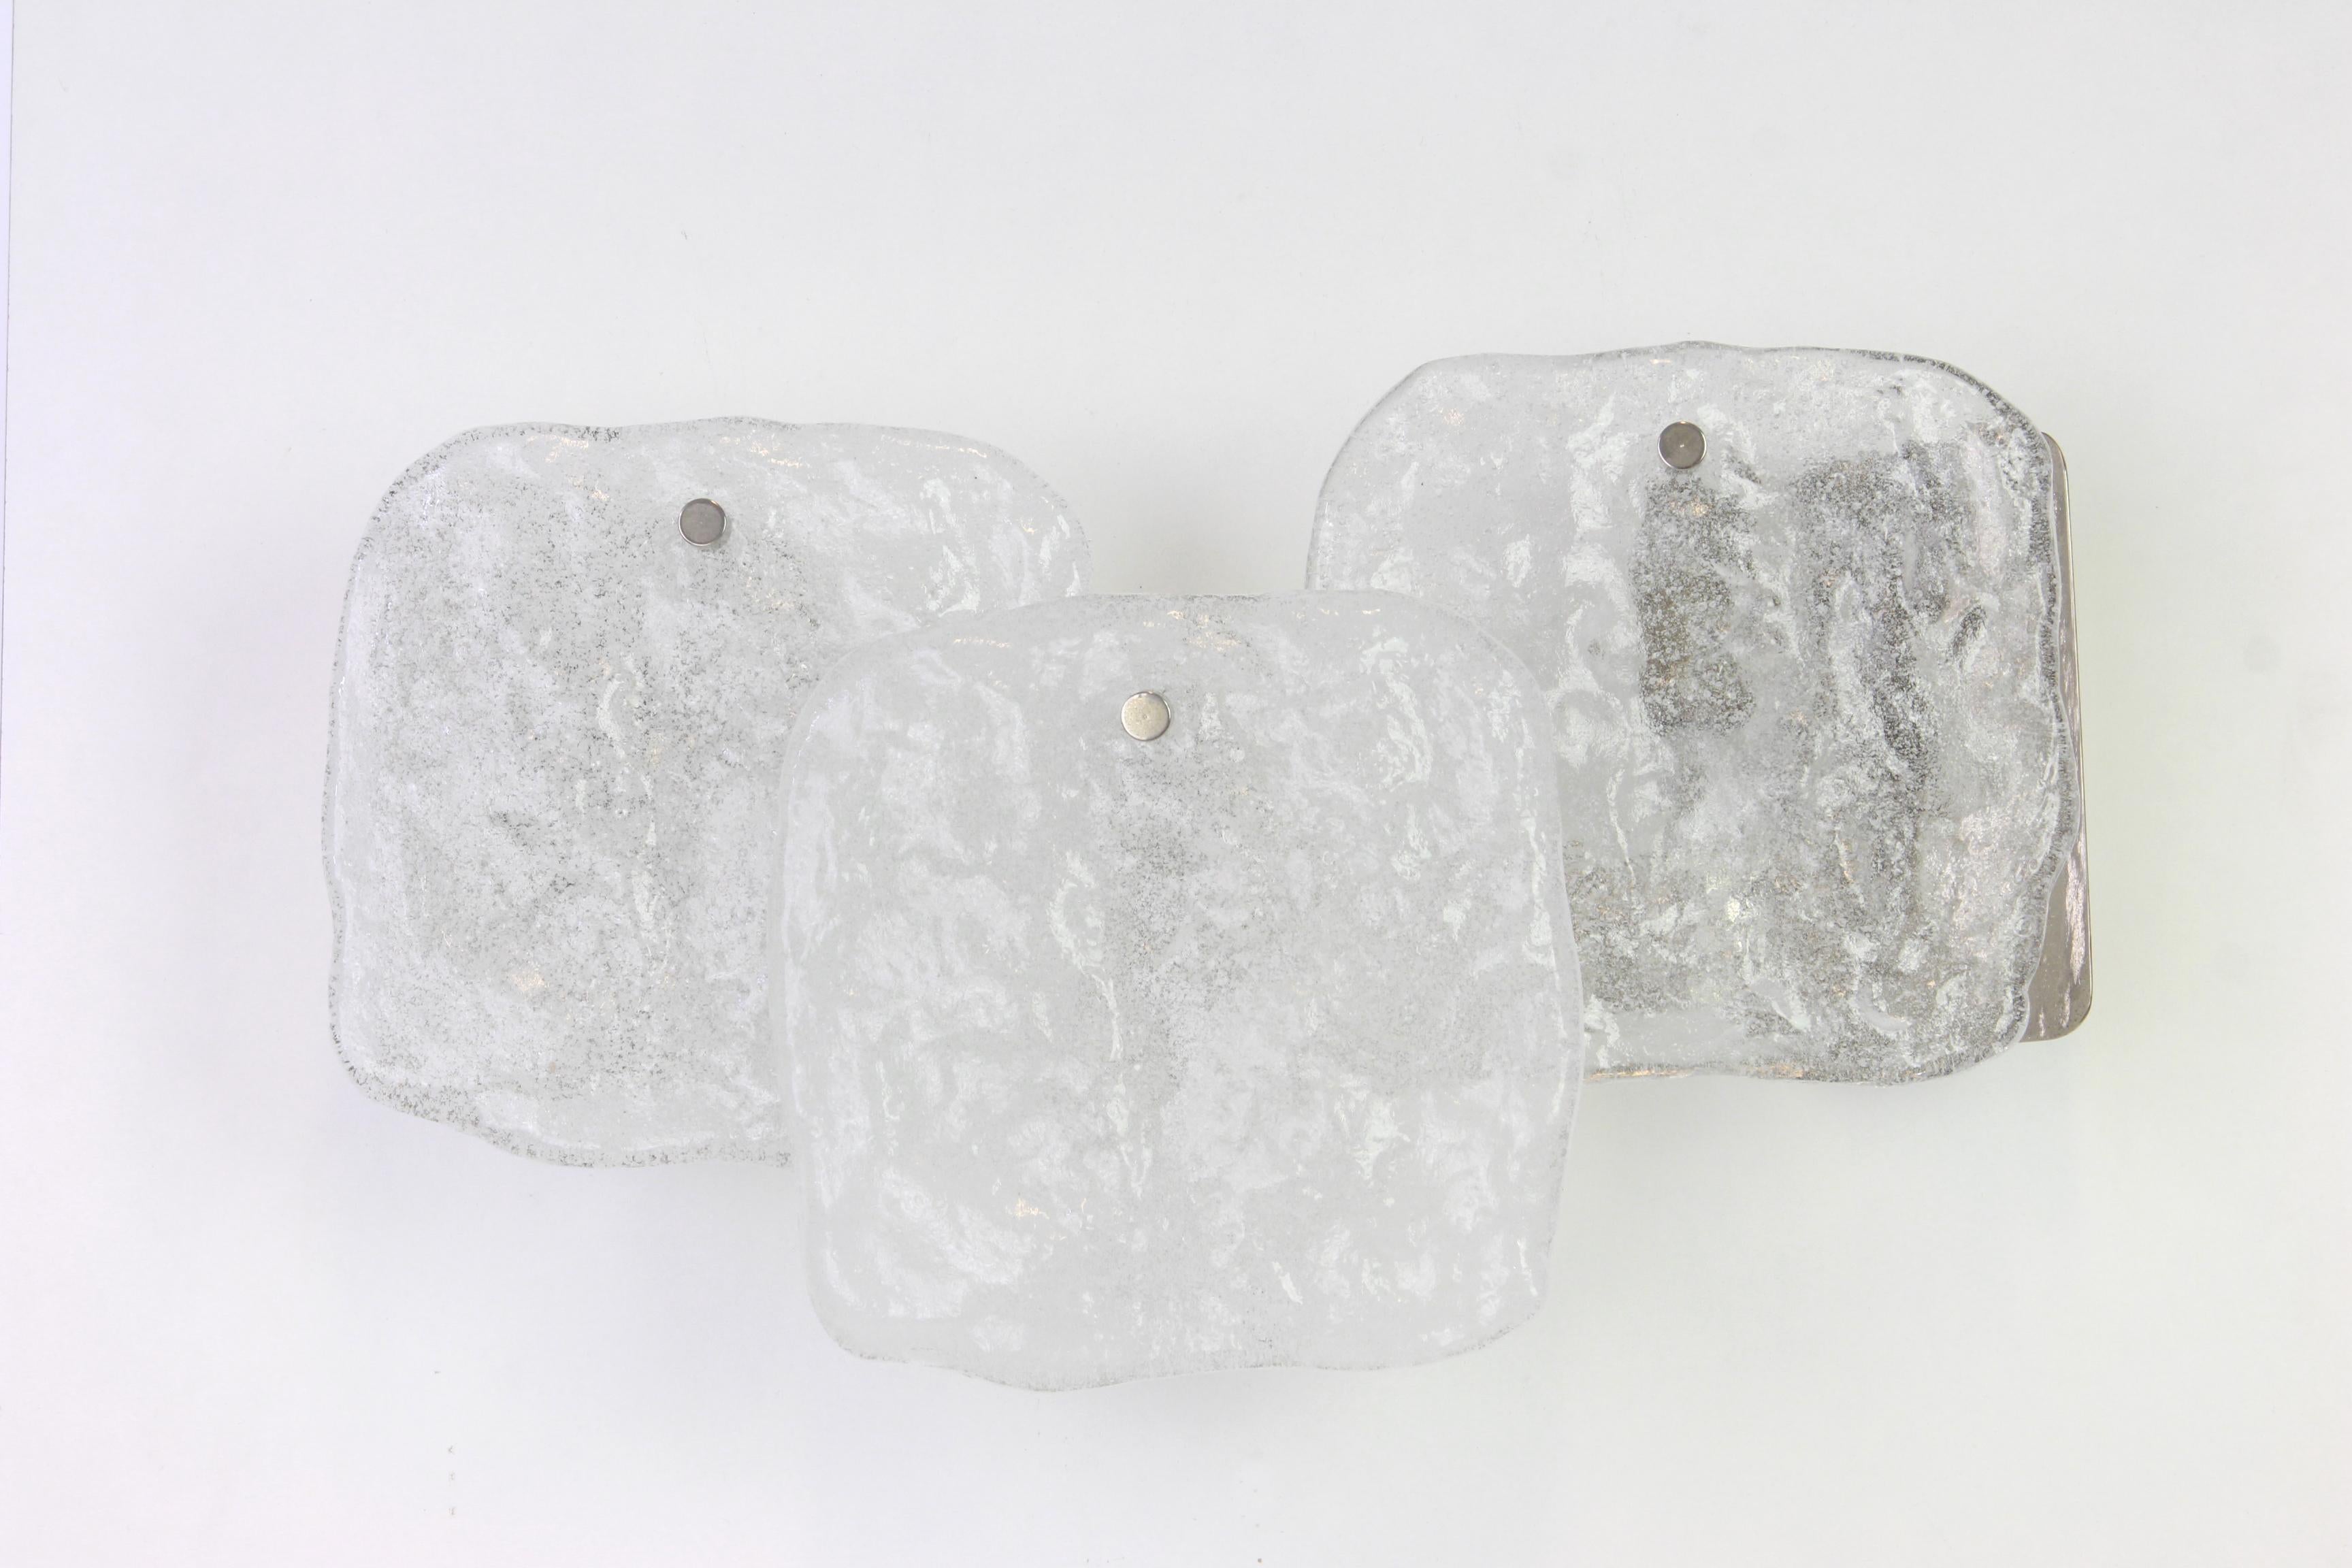 Fantastic midcentury wall sconces with 3 large Murano glass pieces in each lamp, made by Kalmar, Austria, manufactured, circa 1960-1969.
Great geometrical shape. 
Each sconce needs three x E14 small bulbs.
Light bulbs are not included. It is